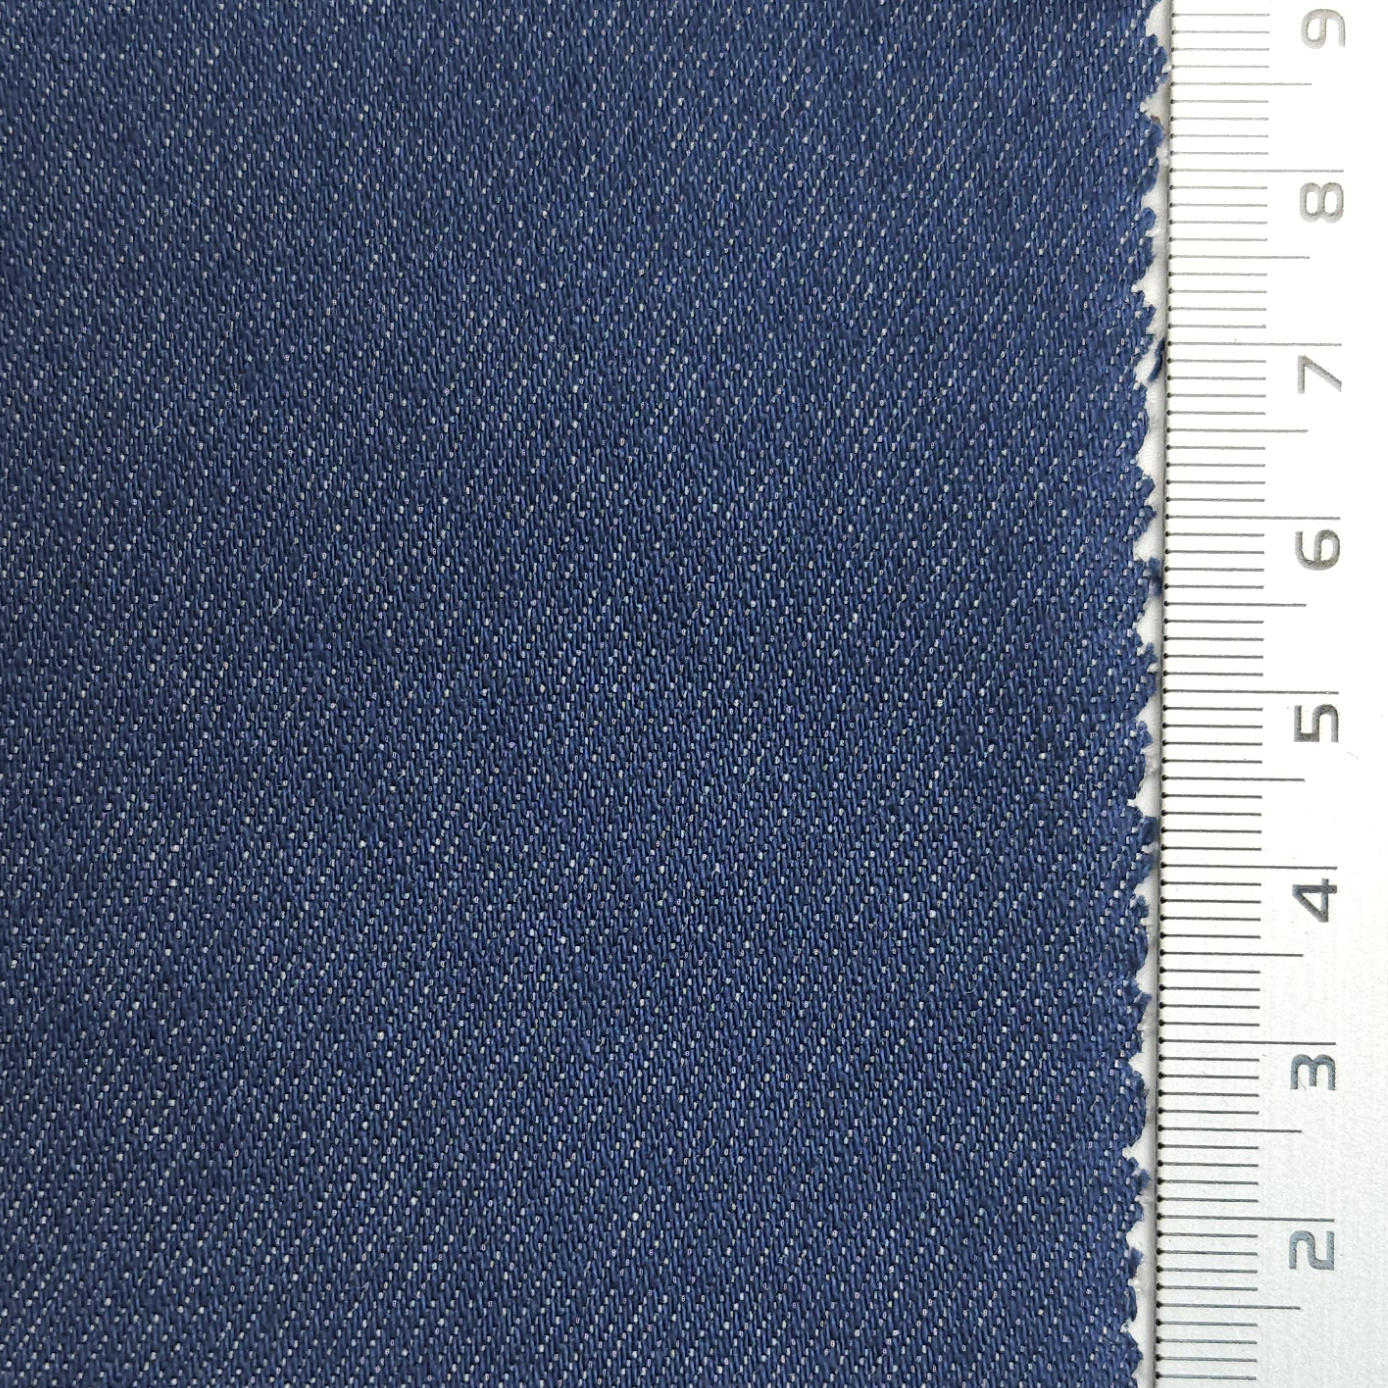 Solid Brushed Denim Cotton Polyester Spandex Woven Fabric | FAB1606 | 1.FAB1606-1, 2.FAB1606-2, 3.FAB1606-3, 4.FAB1606-4, 5.FAB1606-5, 6.FAB1606-6, 7.FAB1606-7, 8.FAB1606-8, 9.FAB1606-9, 10.FAB1606-10 by Fabricis.com #